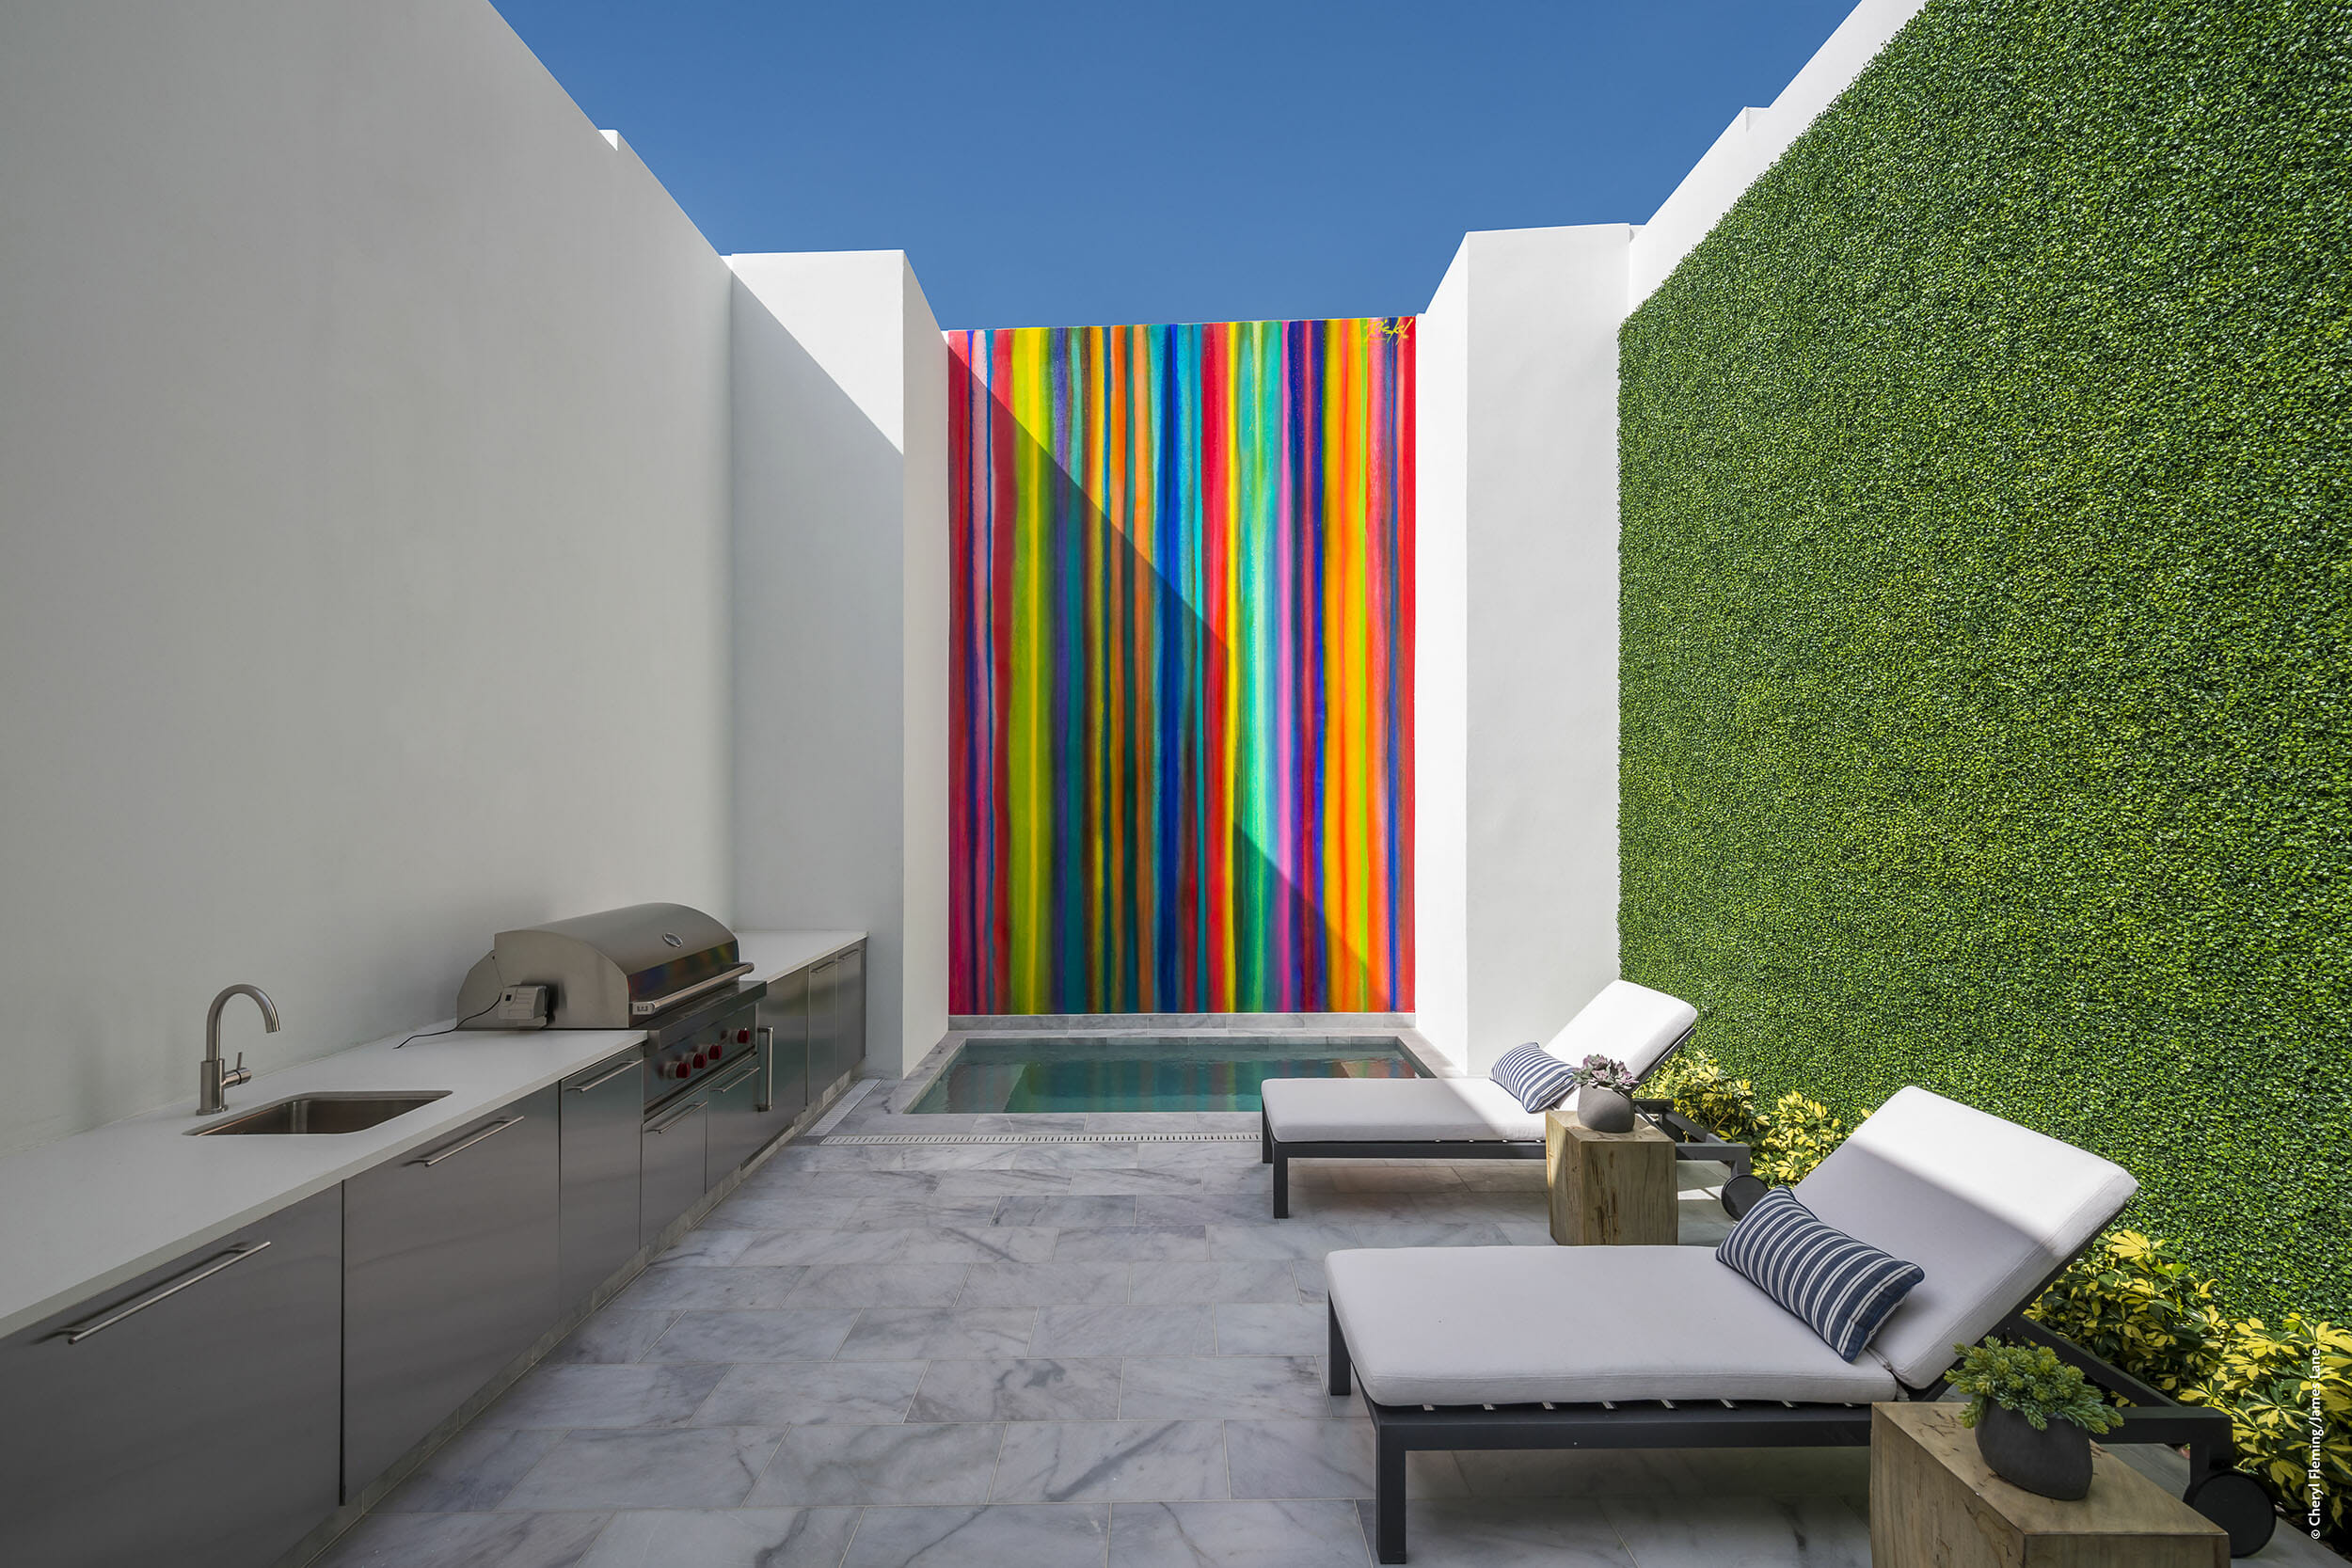 A backyard with a colorful wall and chairs.